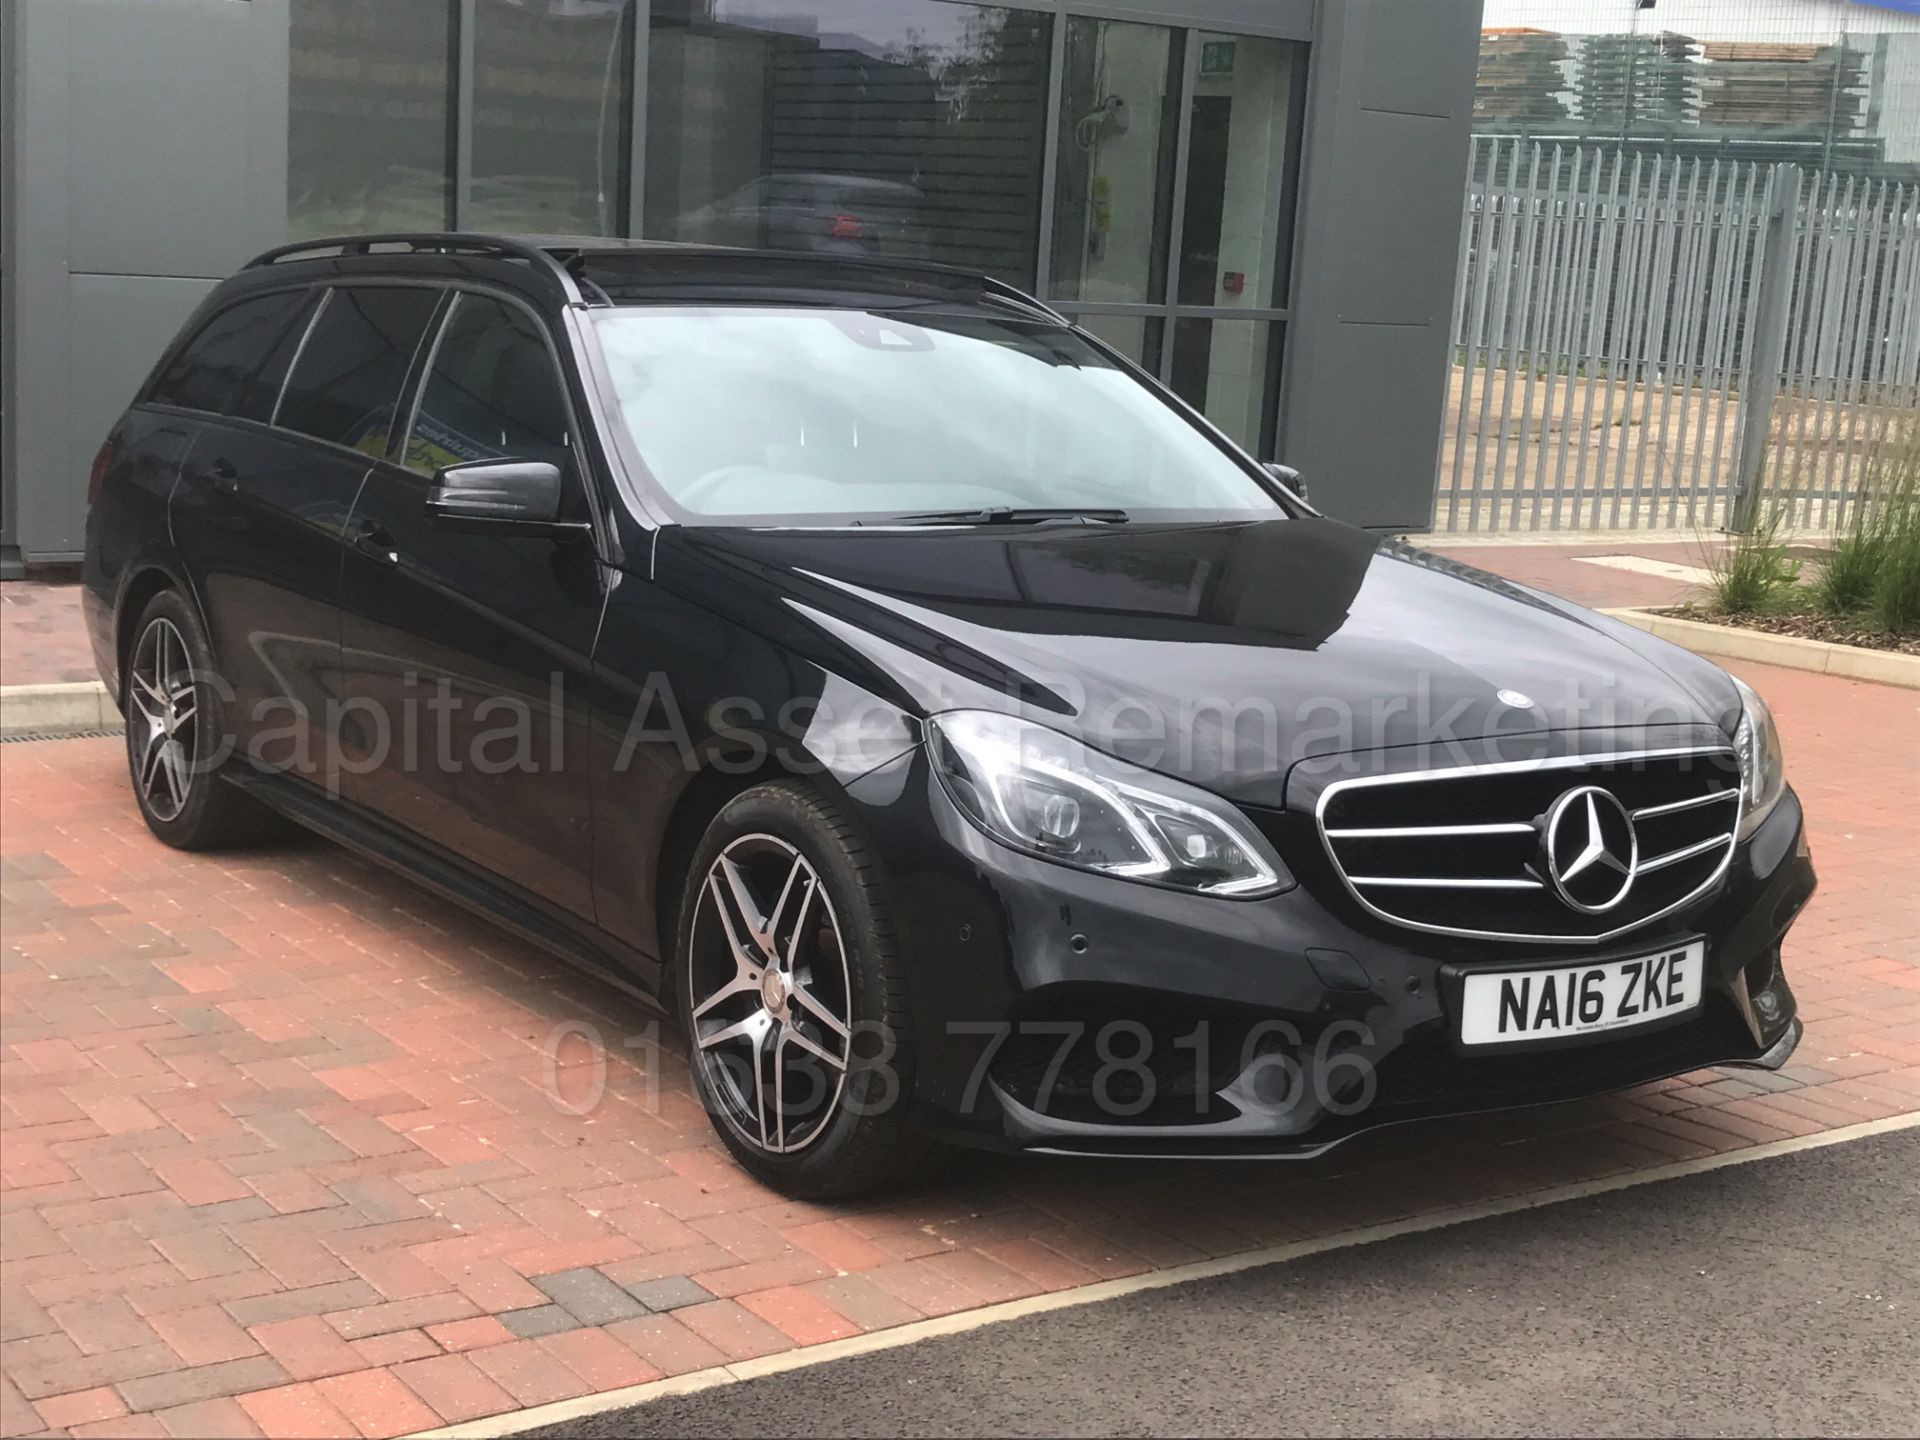 (On Sale)MERCEDES-BENZ E220D 'AMG NIGHT EDITION - PREMIUM' (2016) 'AUTO' - LEATHER - NAV - PAN ROOF* - Image 2 of 50